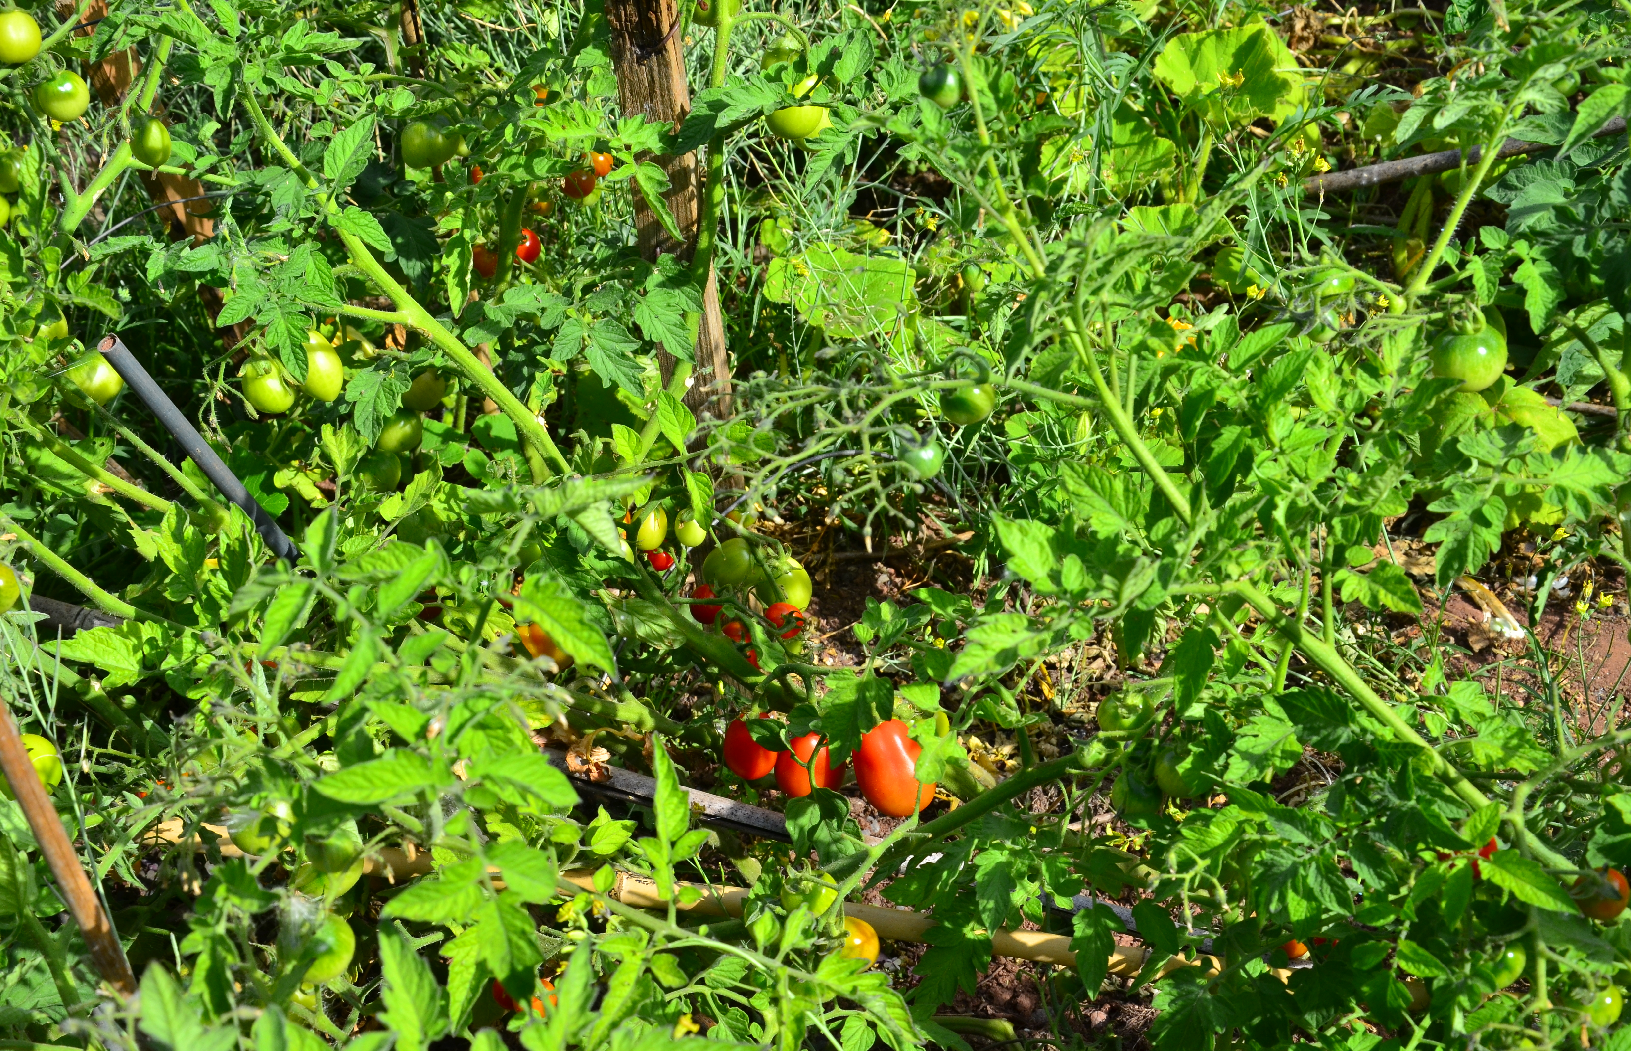 Tomato plants and fruit